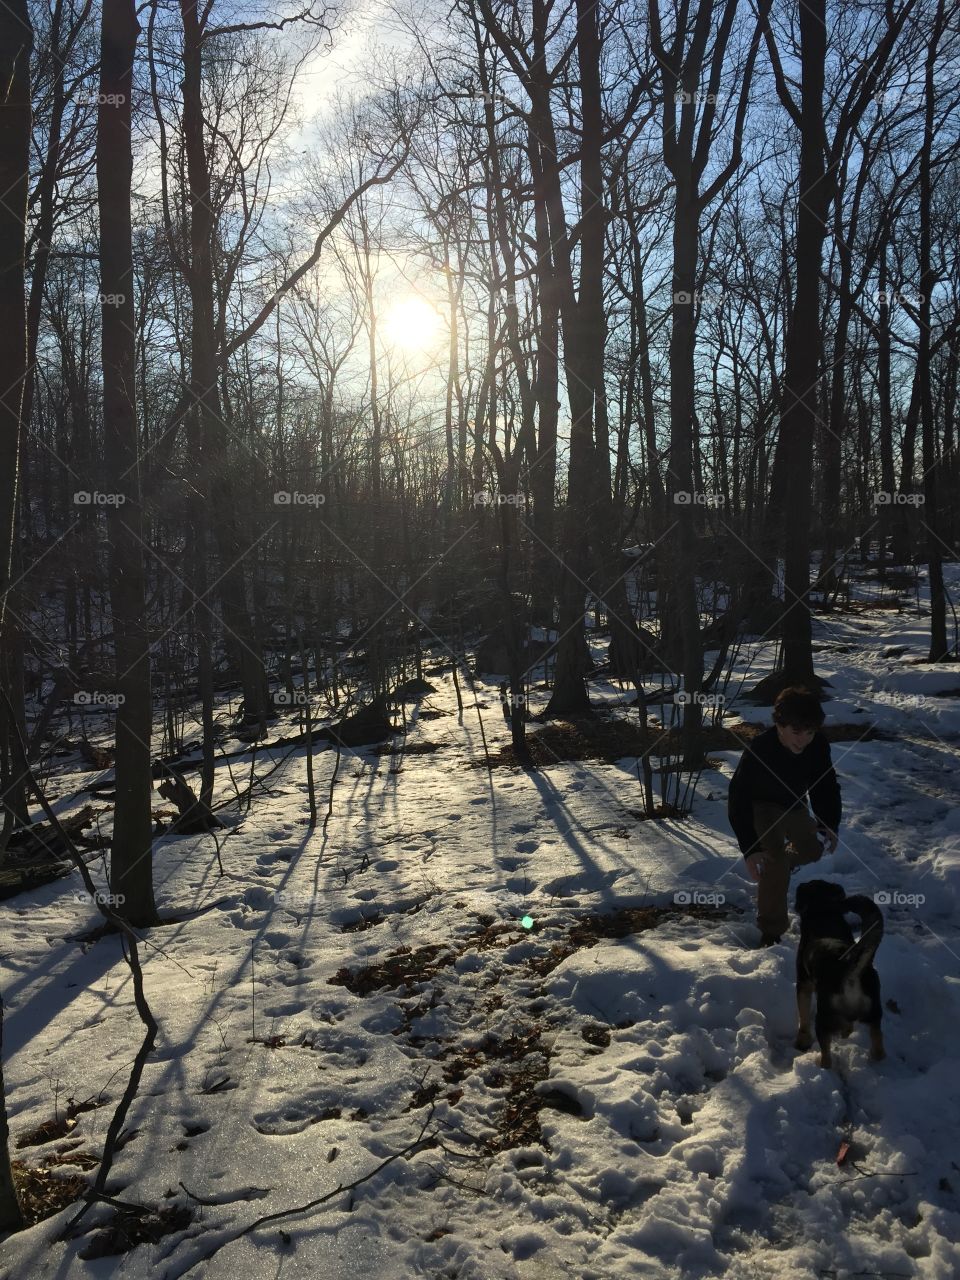 Little brother and my puppy having some nephew/uncle bonding time in the snow 